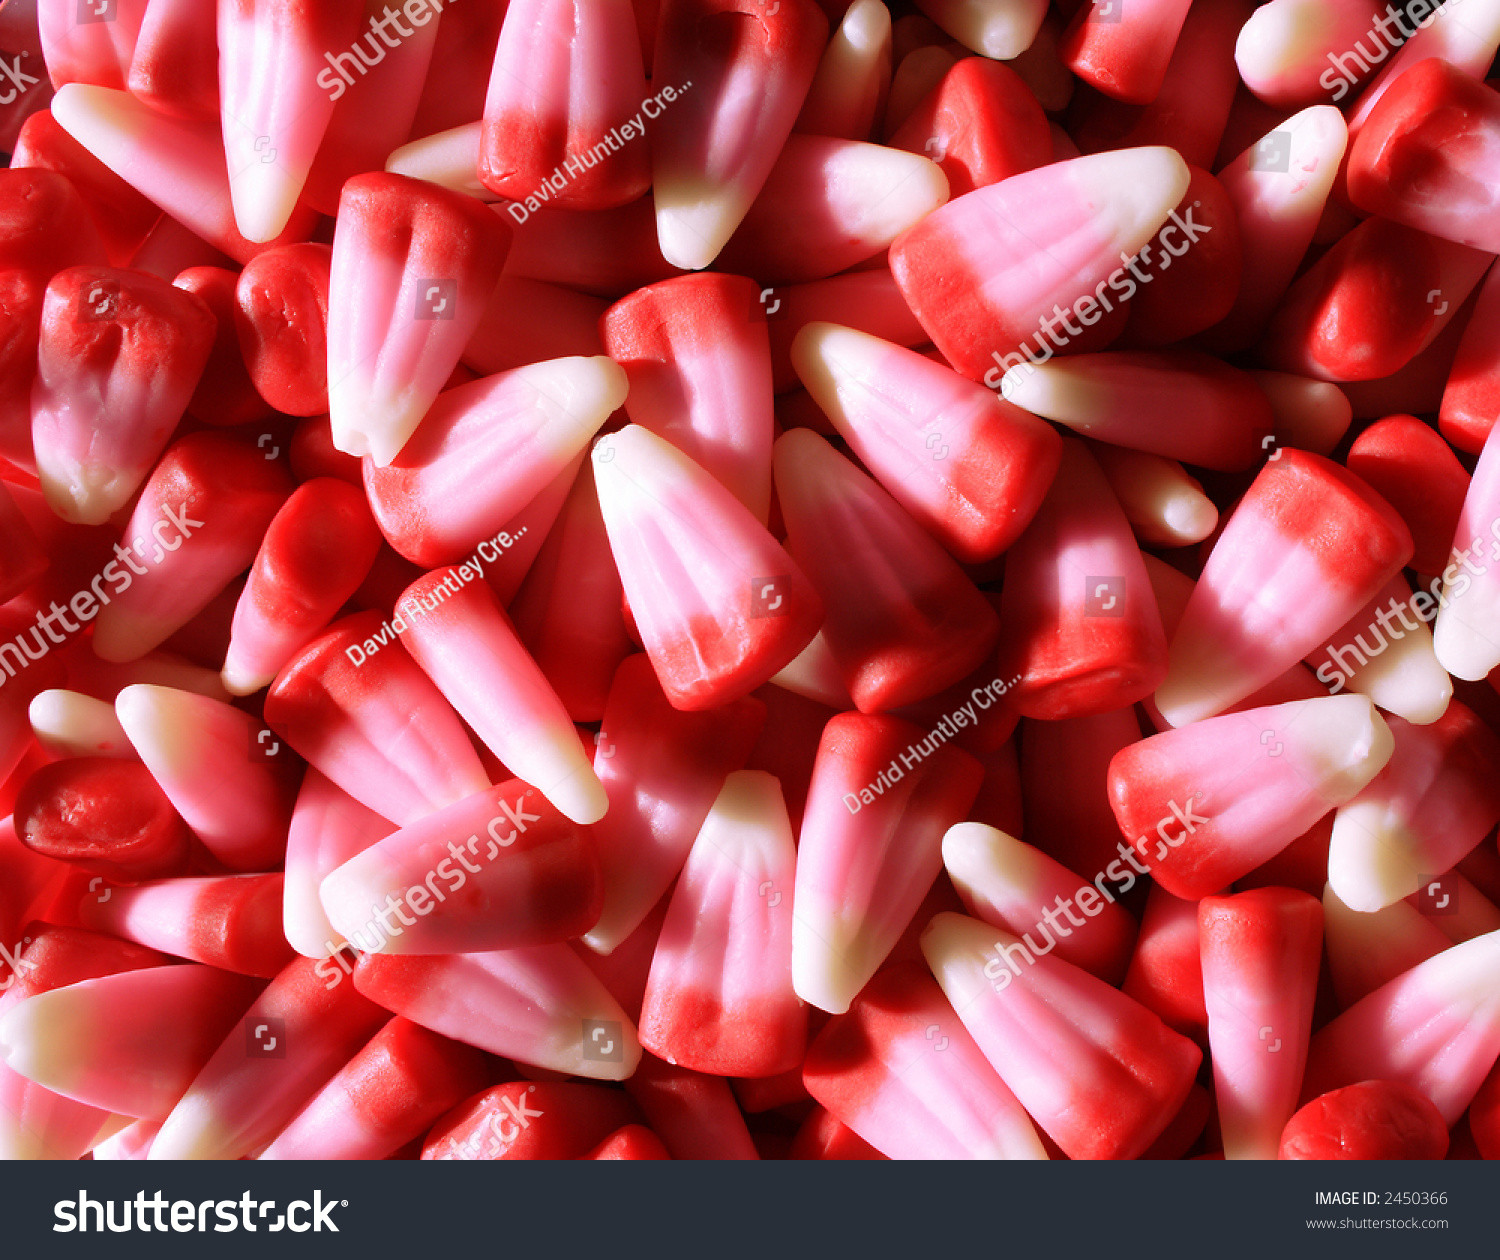 Valentines Day Candy Corn
 Valentines Day Candy Corn Red Pink Stock